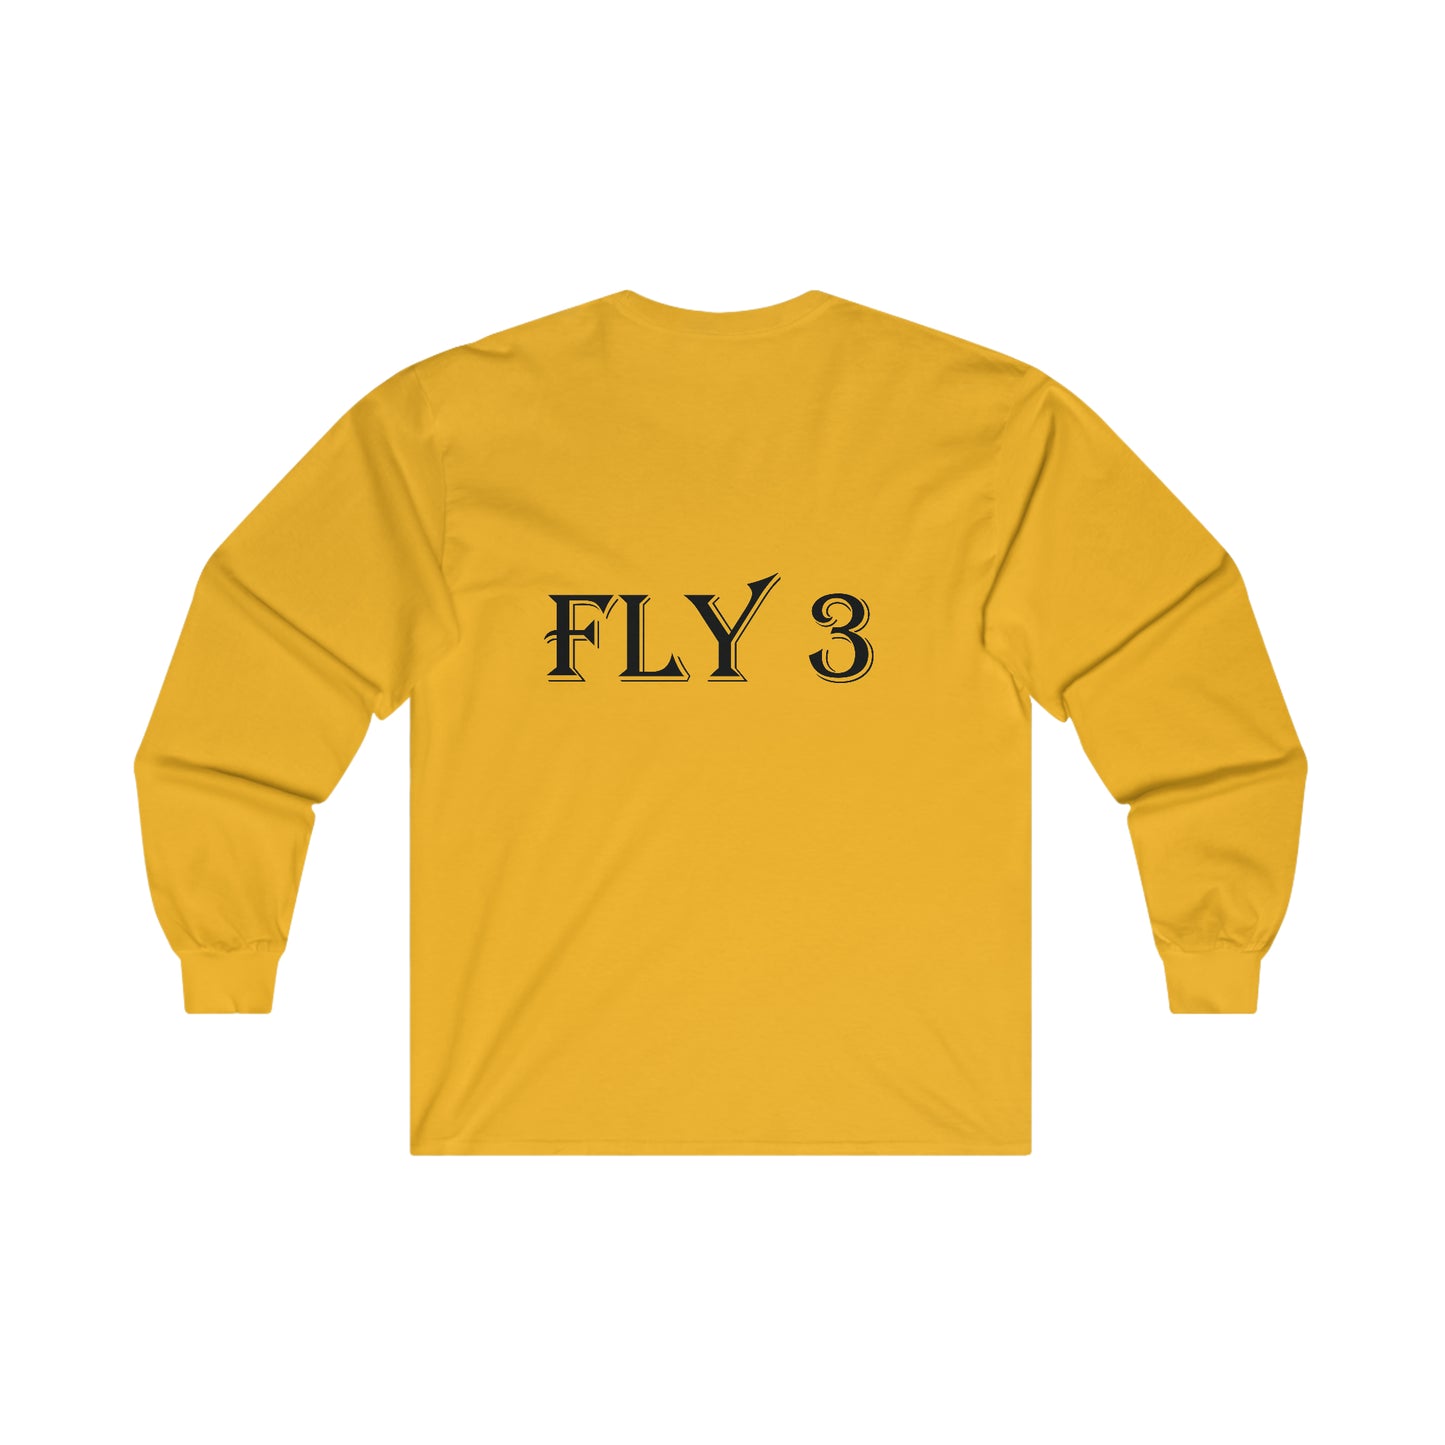 V-1 Fly 3 Flight Deck Jersey (Blue and Yellow)